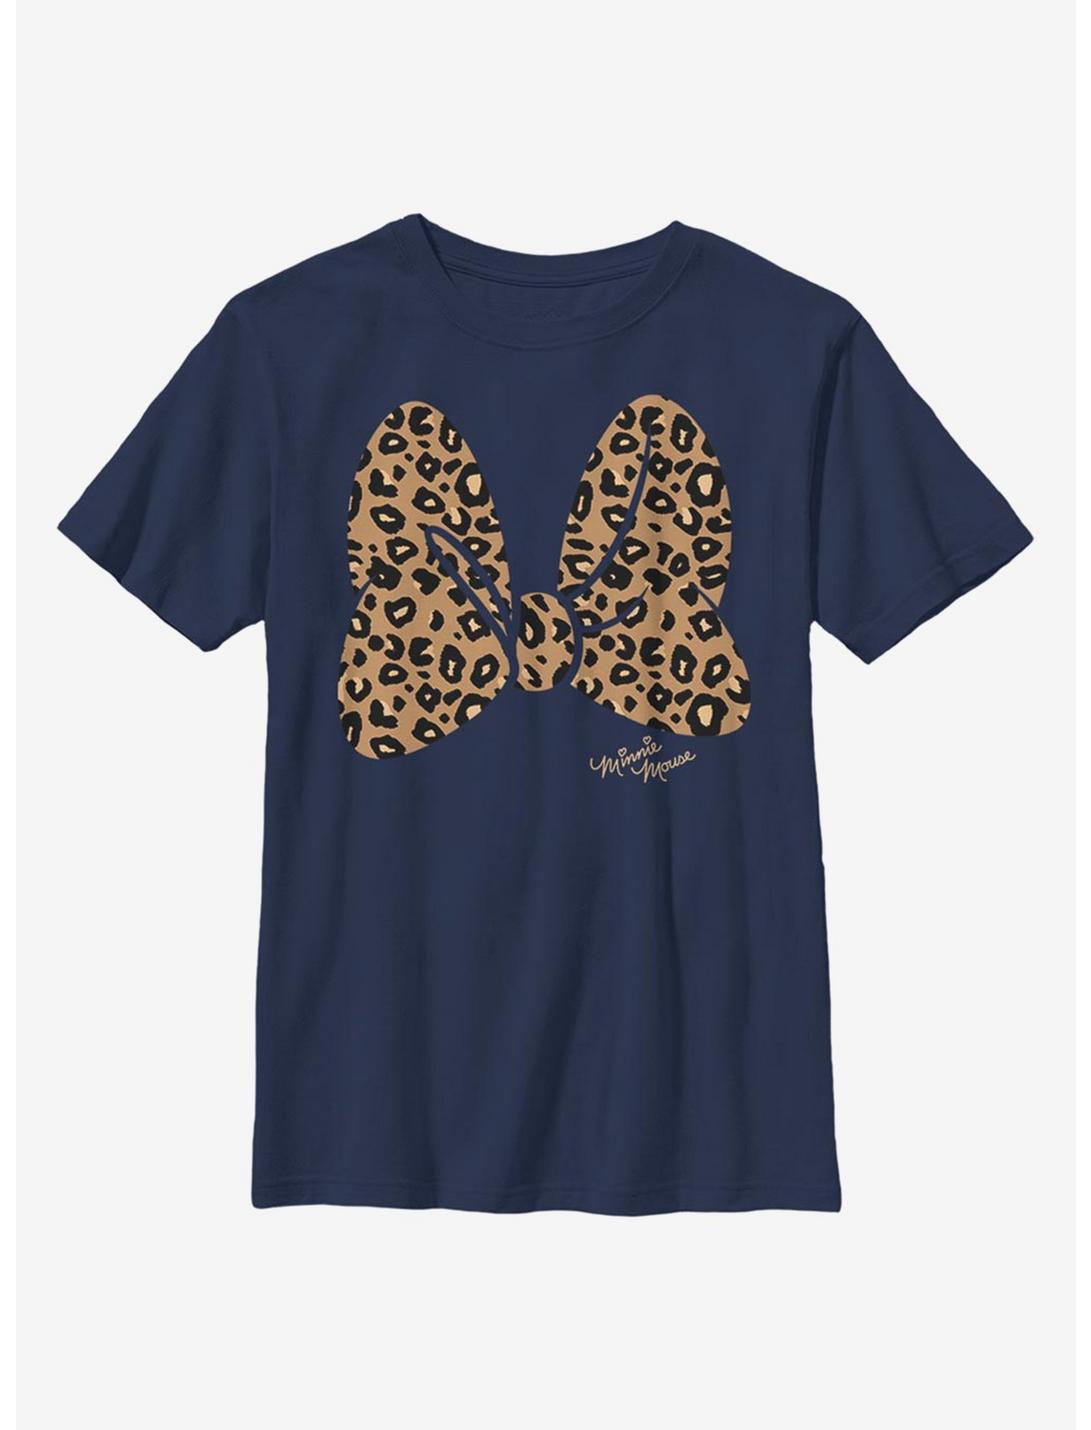 Disney Minnie Mouse Animal Print Bow Youth T-Shirt, NAVY, hi-res